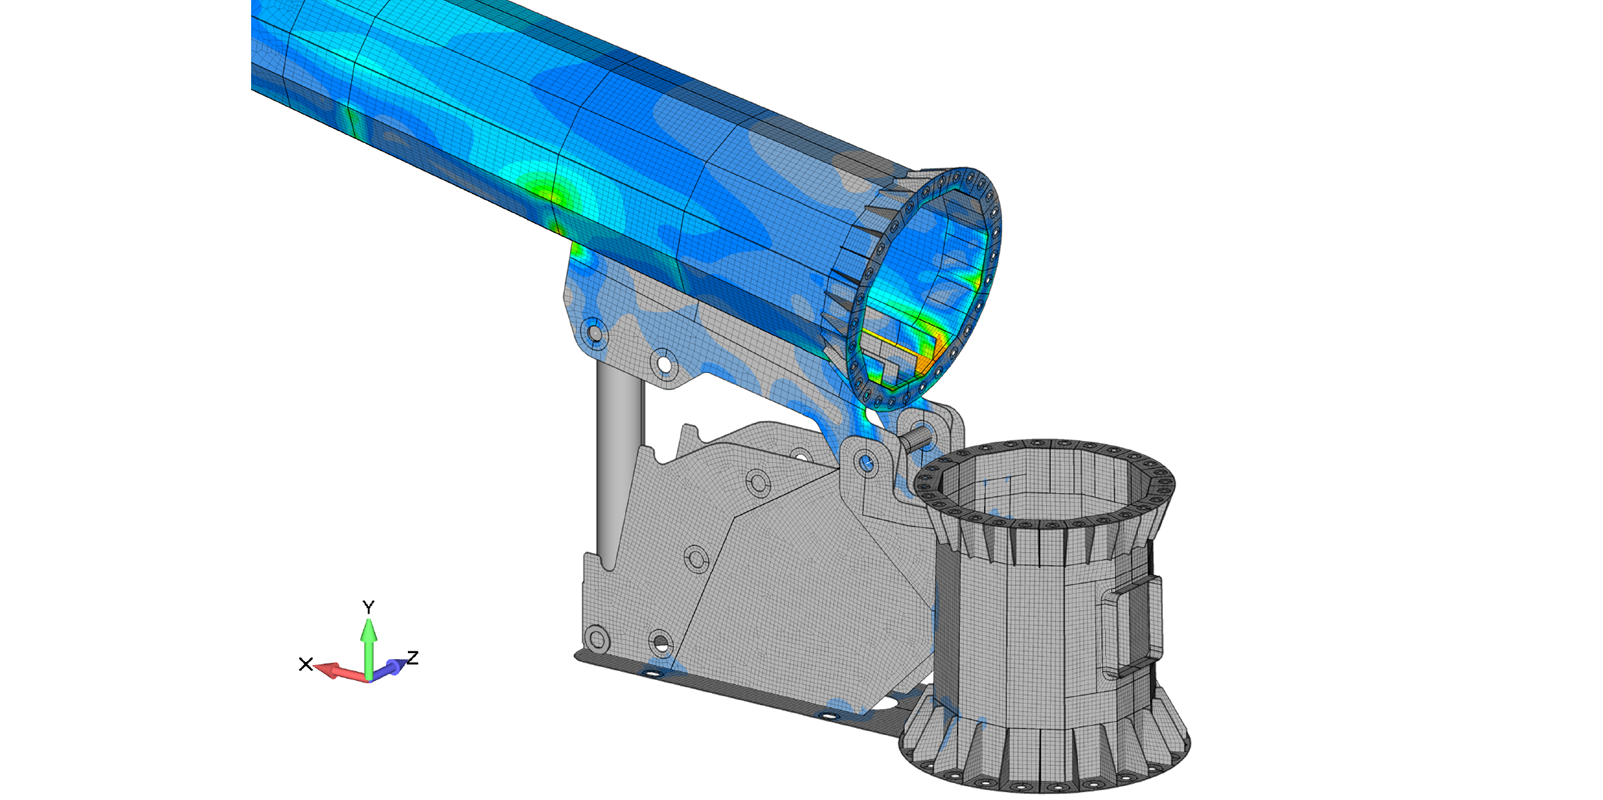 The bottom-out event occurs when the prop rod hits the concrete foundation as the tower is being lowered.  With the tower in this orientation, the turbine is accessible for service - FEA Engineering Consultants - Predictive Engineering